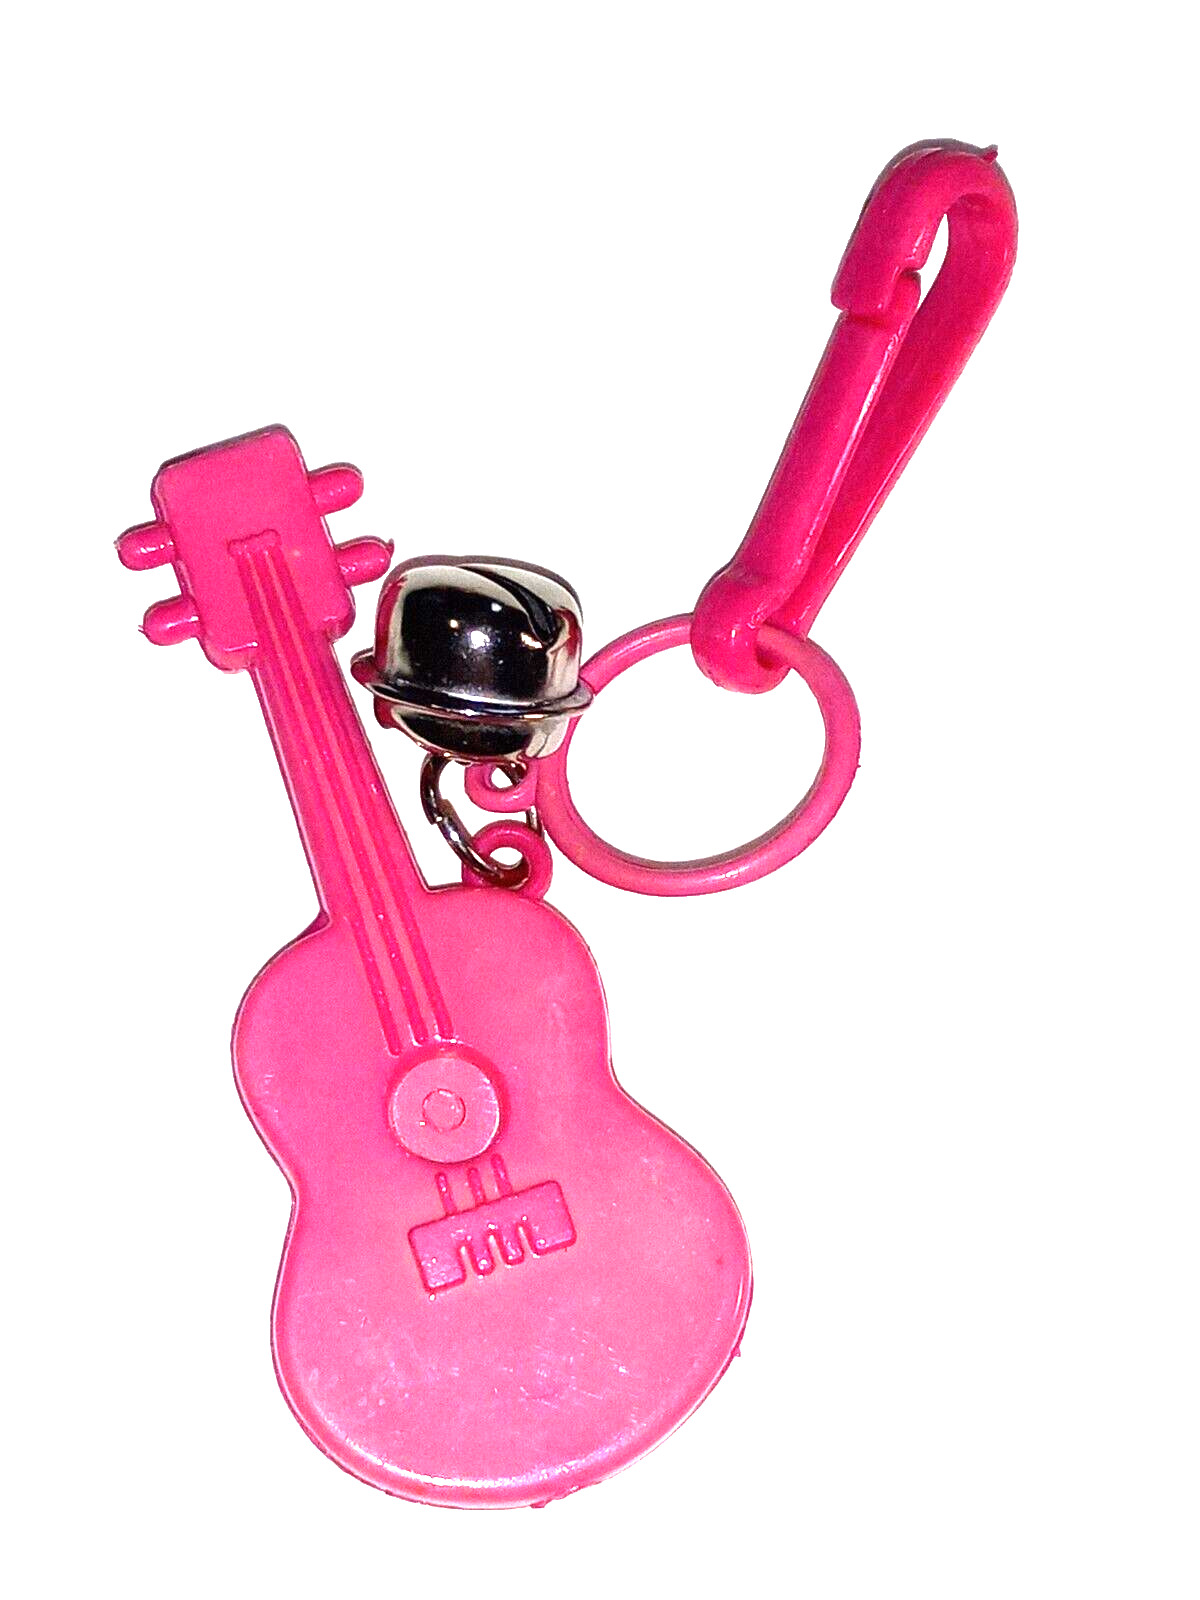 Vintage 1980s Plastic Charm Pink Guitar for 80s Charms Necklace Clip On Retro